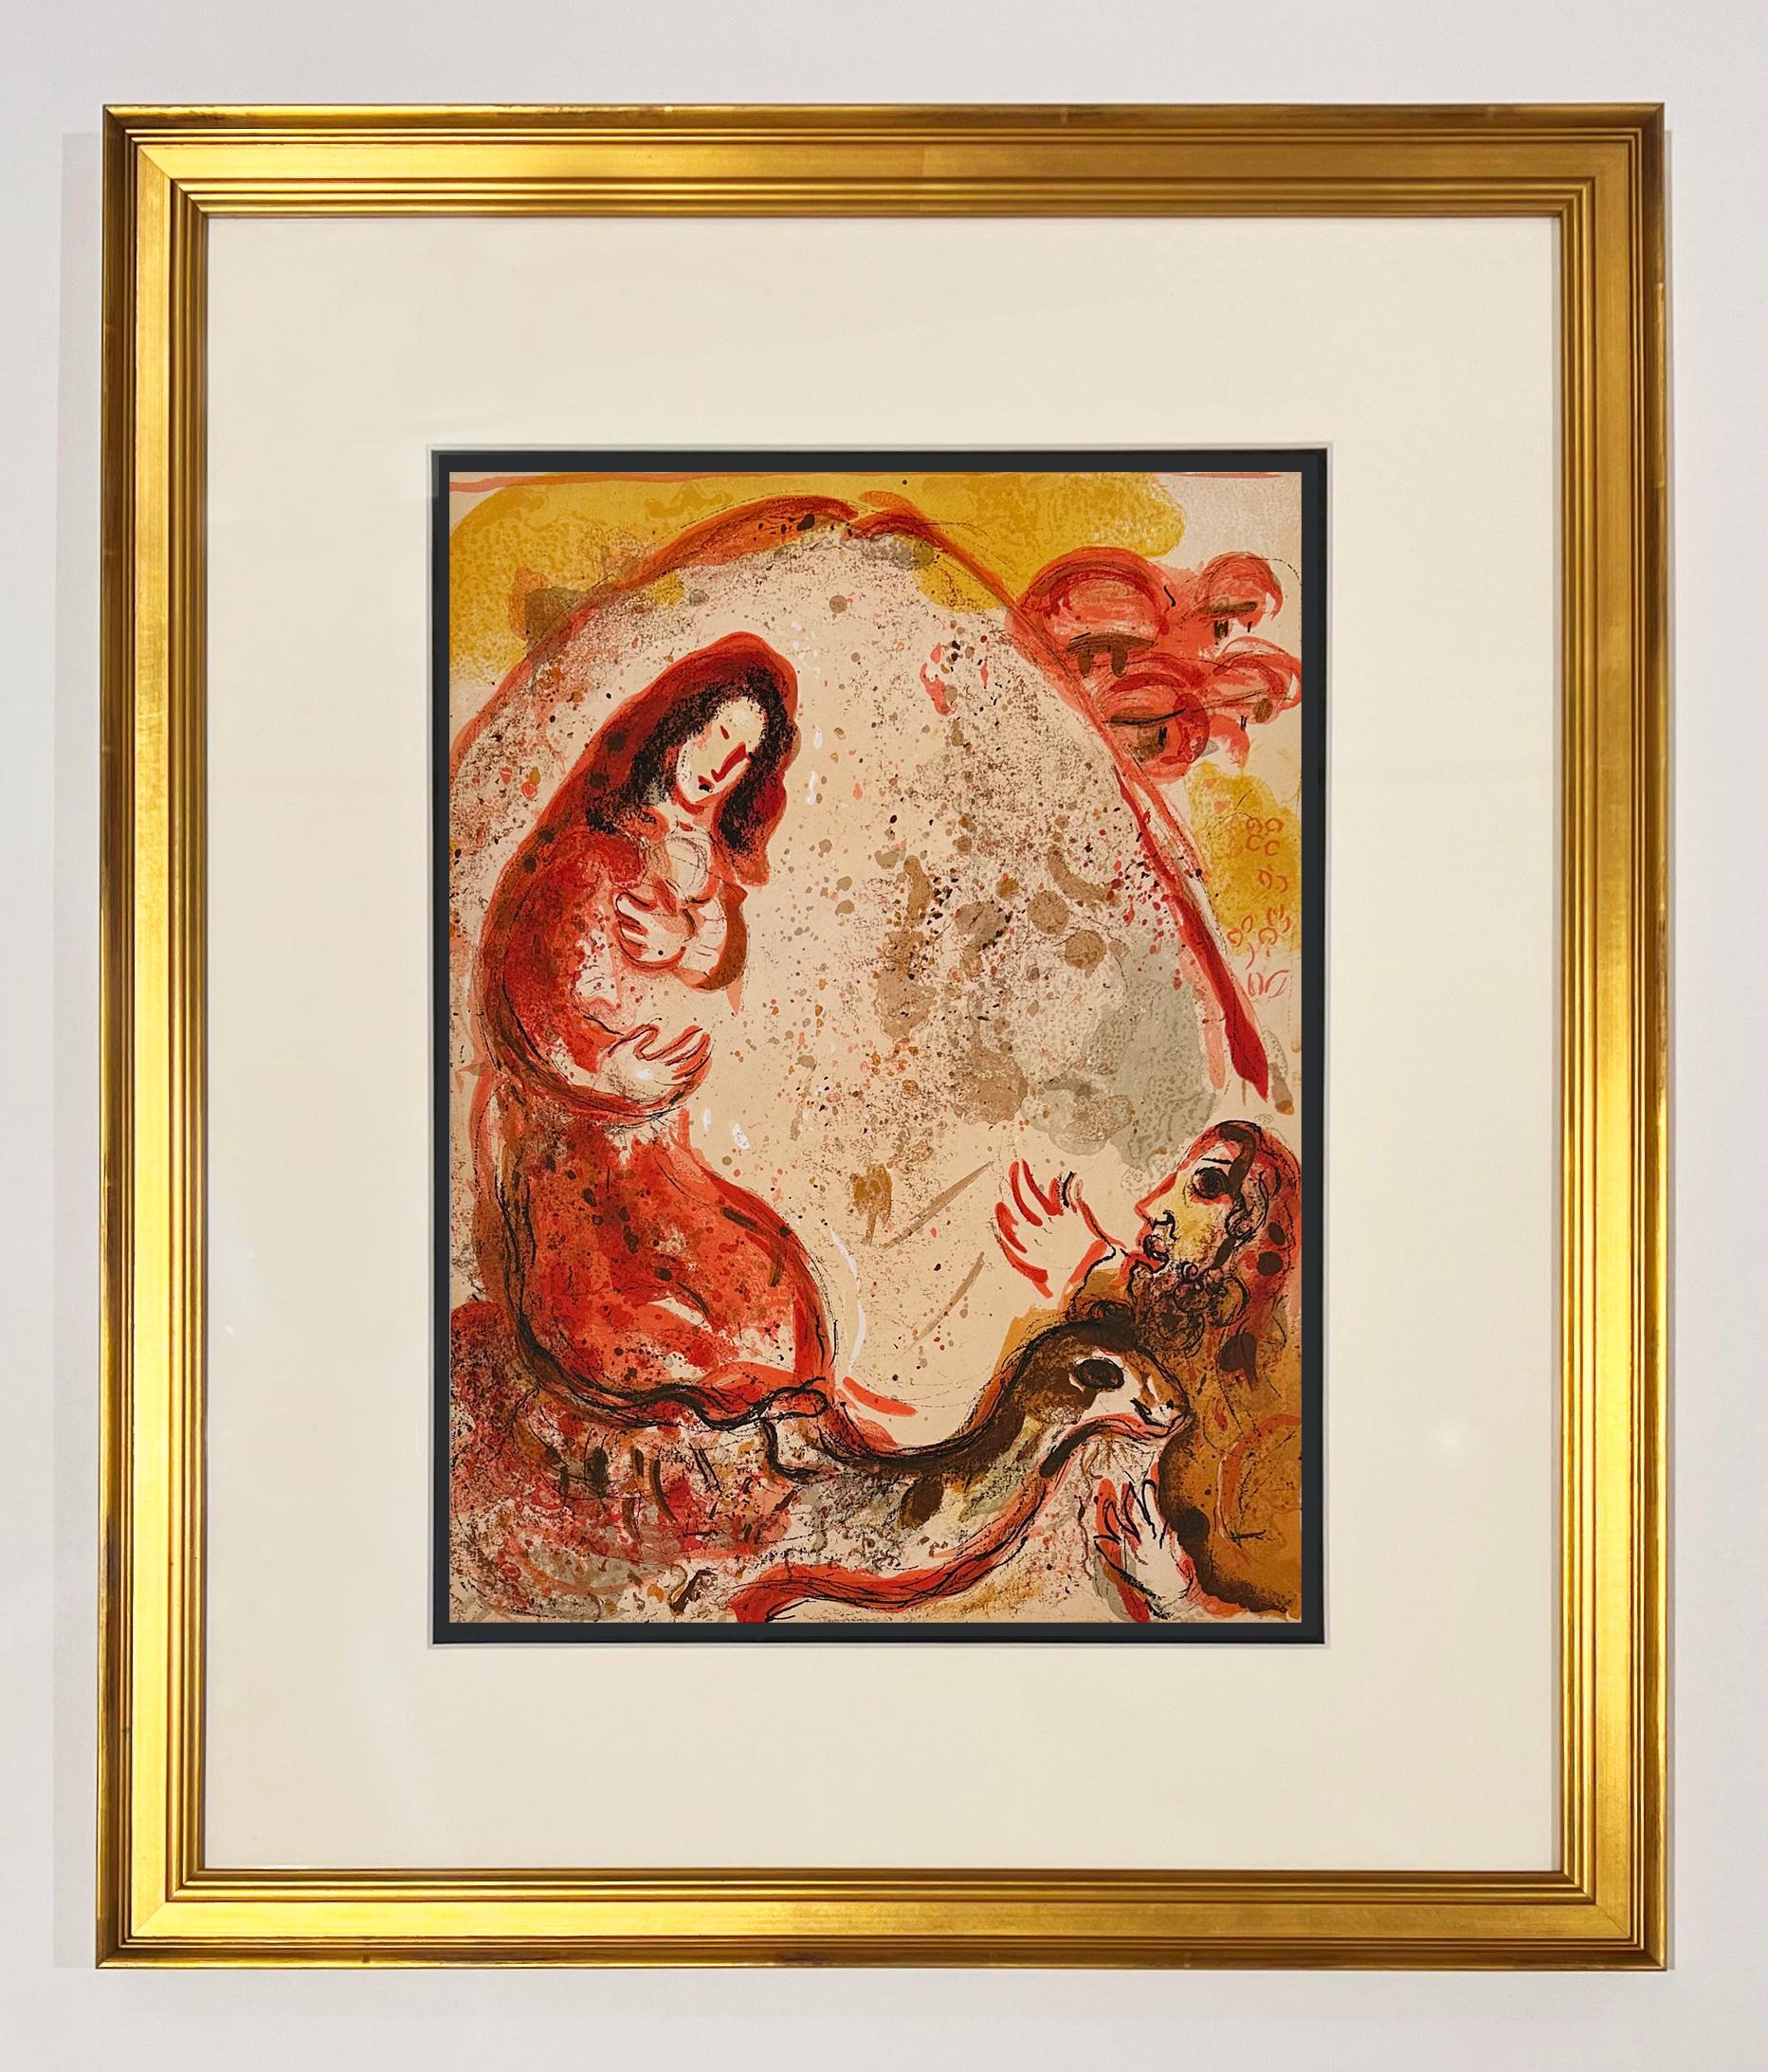 Rachel Hides Her Father's Household Goods, from 1960 Drawings for the Bible - Print by Marc Chagall